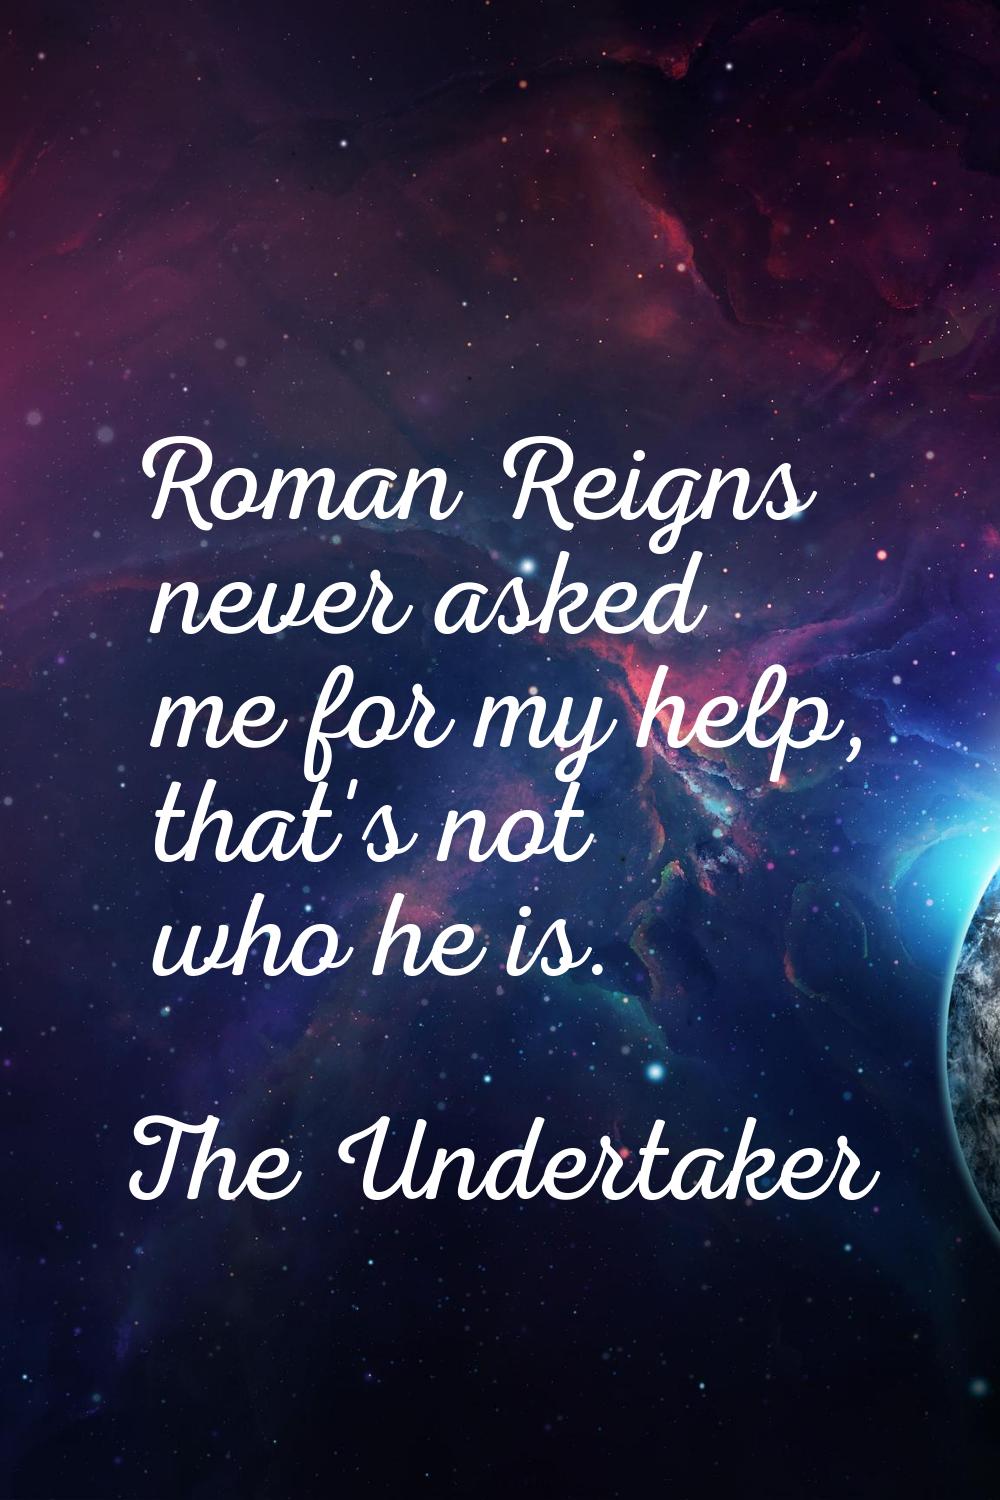 Roman Reigns never asked me for my help, that's not who he is.